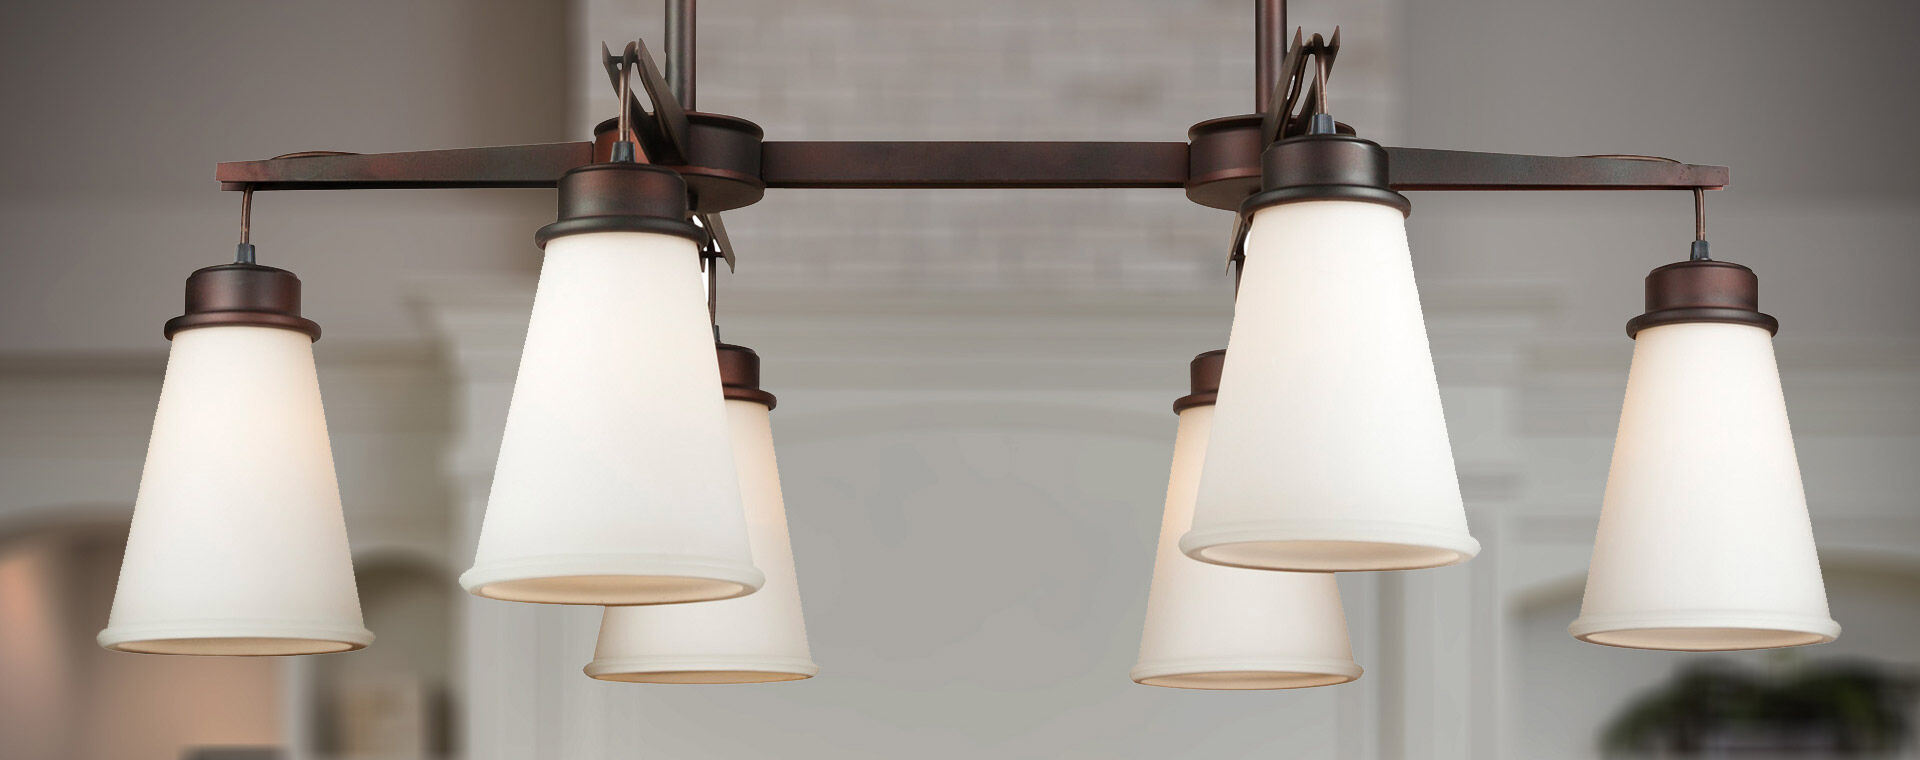 Forte Lighting | 20% Off Entire Line with code: SPRING24 | ends 6.16